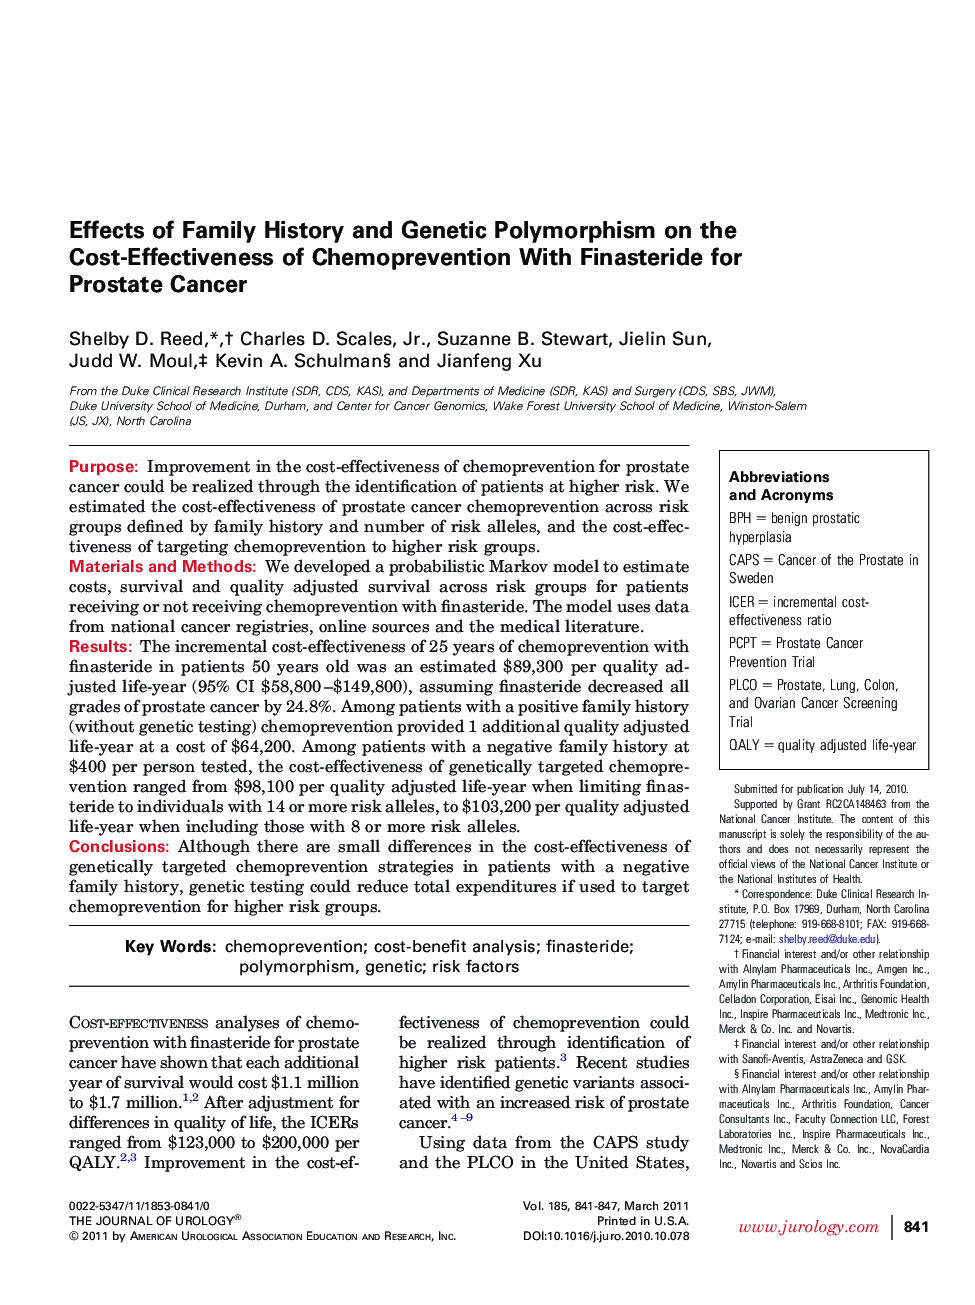 Effects of Family History and Genetic Polymorphism on the Cost-Effectiveness of Chemoprevention With Finasteride for Prostate Cancer 